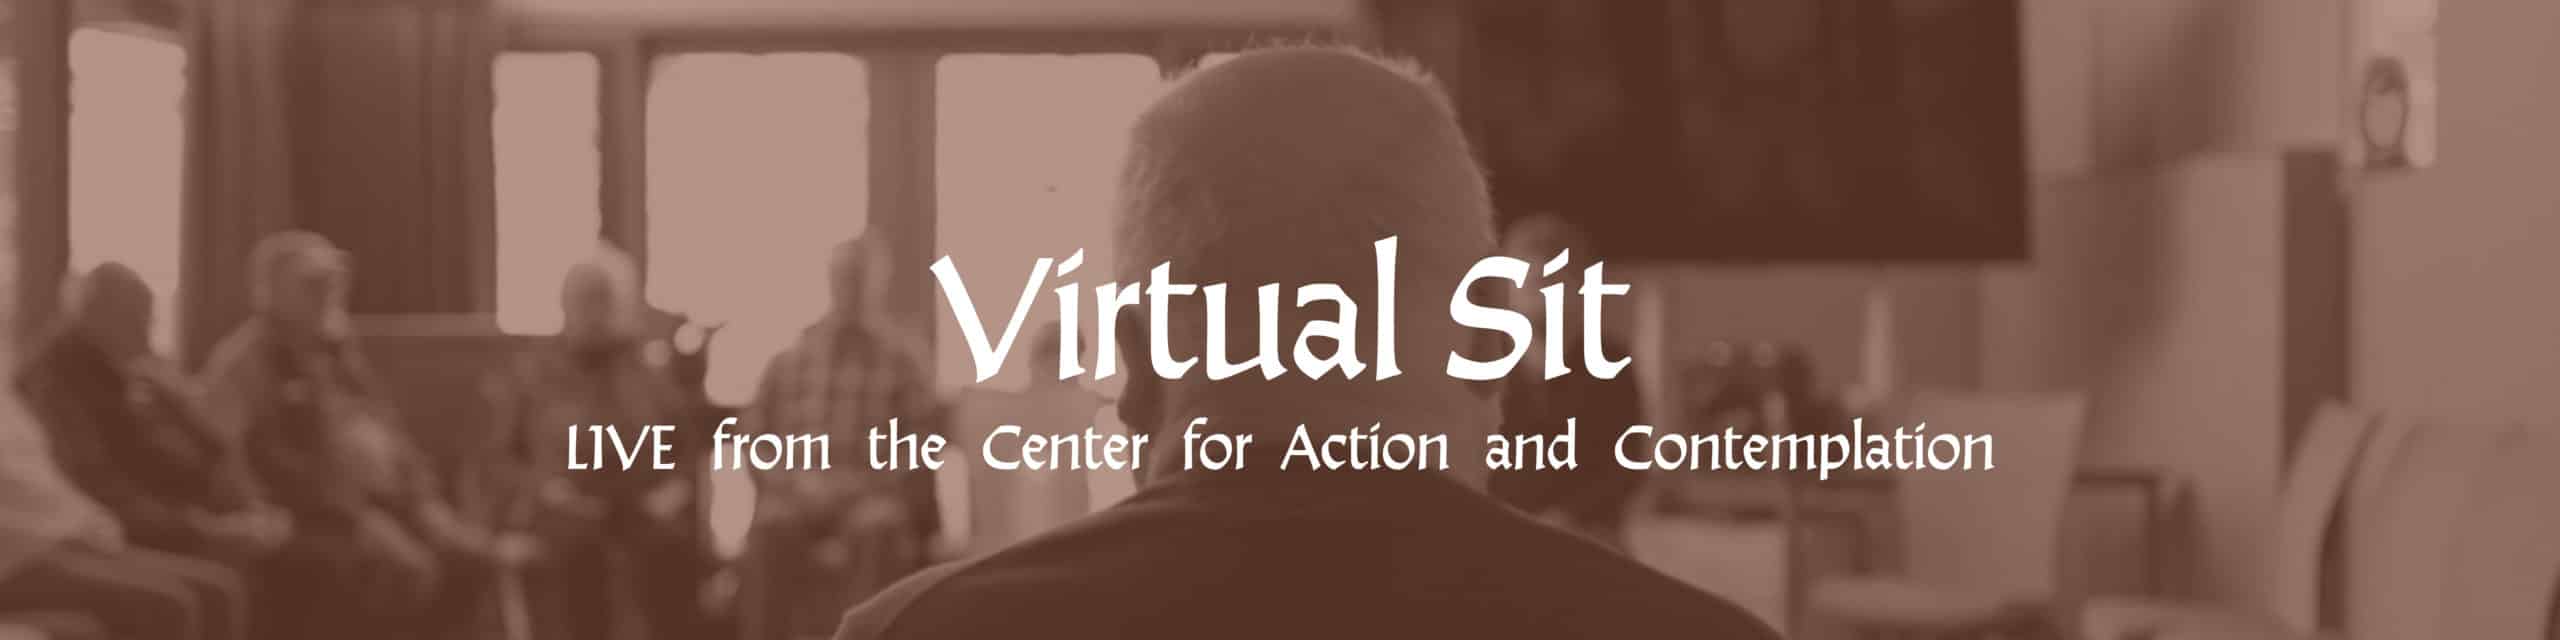 Virtual Sits presented by the Center for Action and Contemplation